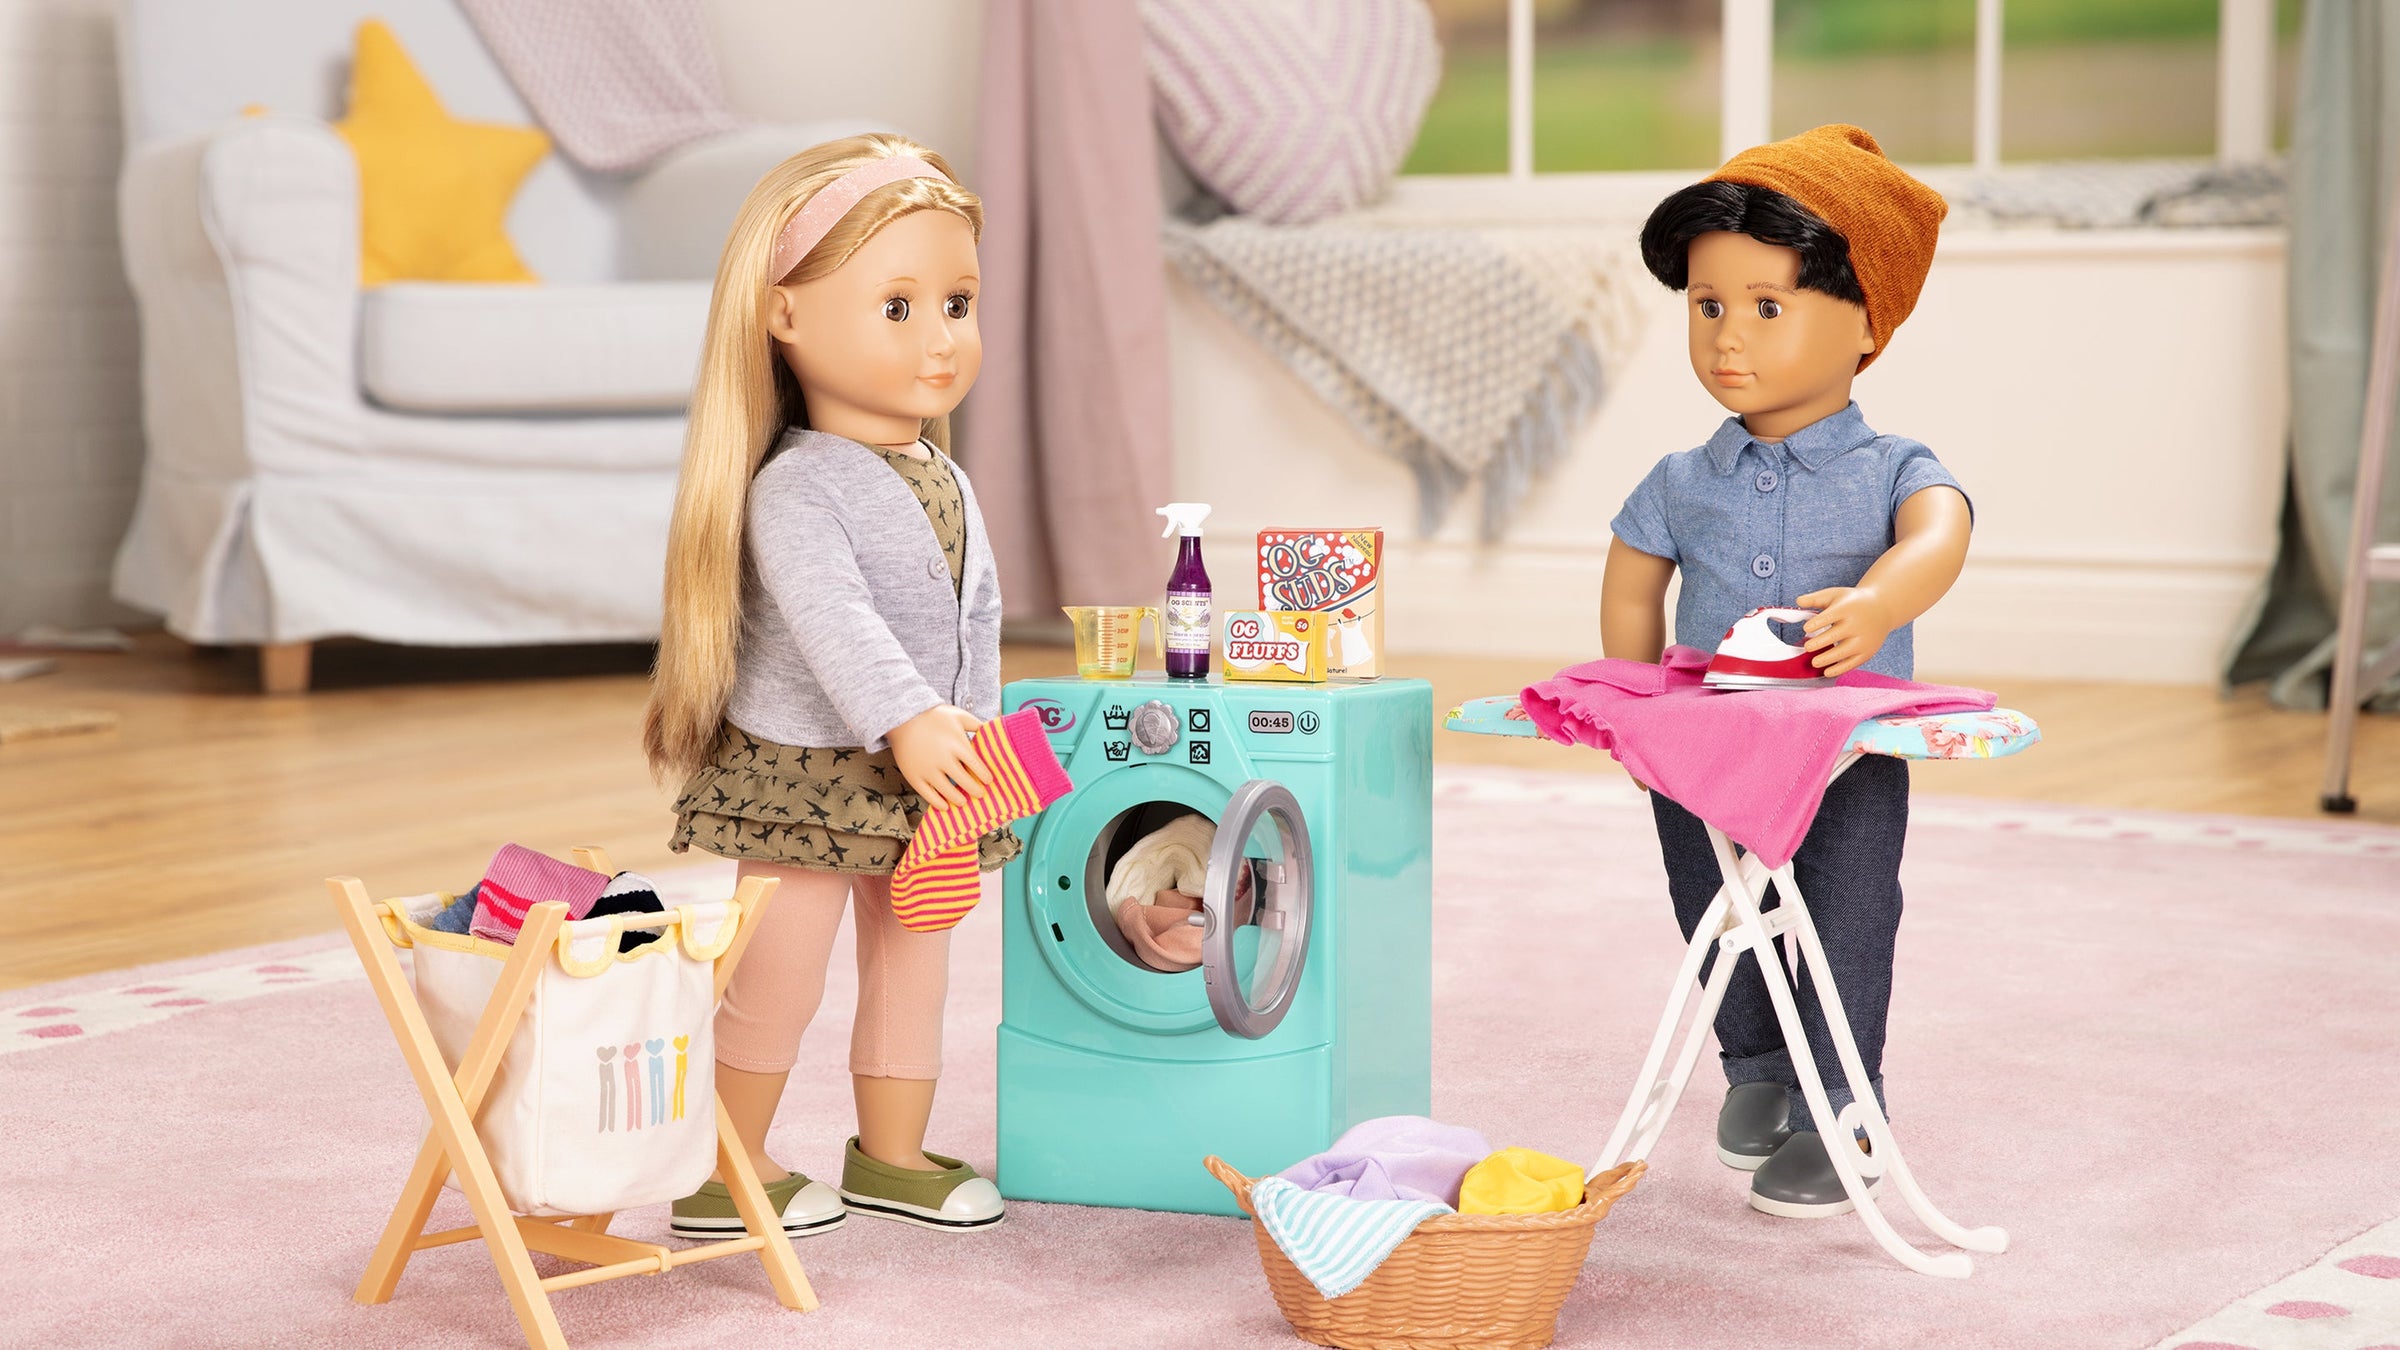 Boy Doll Ironing clothes and Girl Doll Doing Laundry